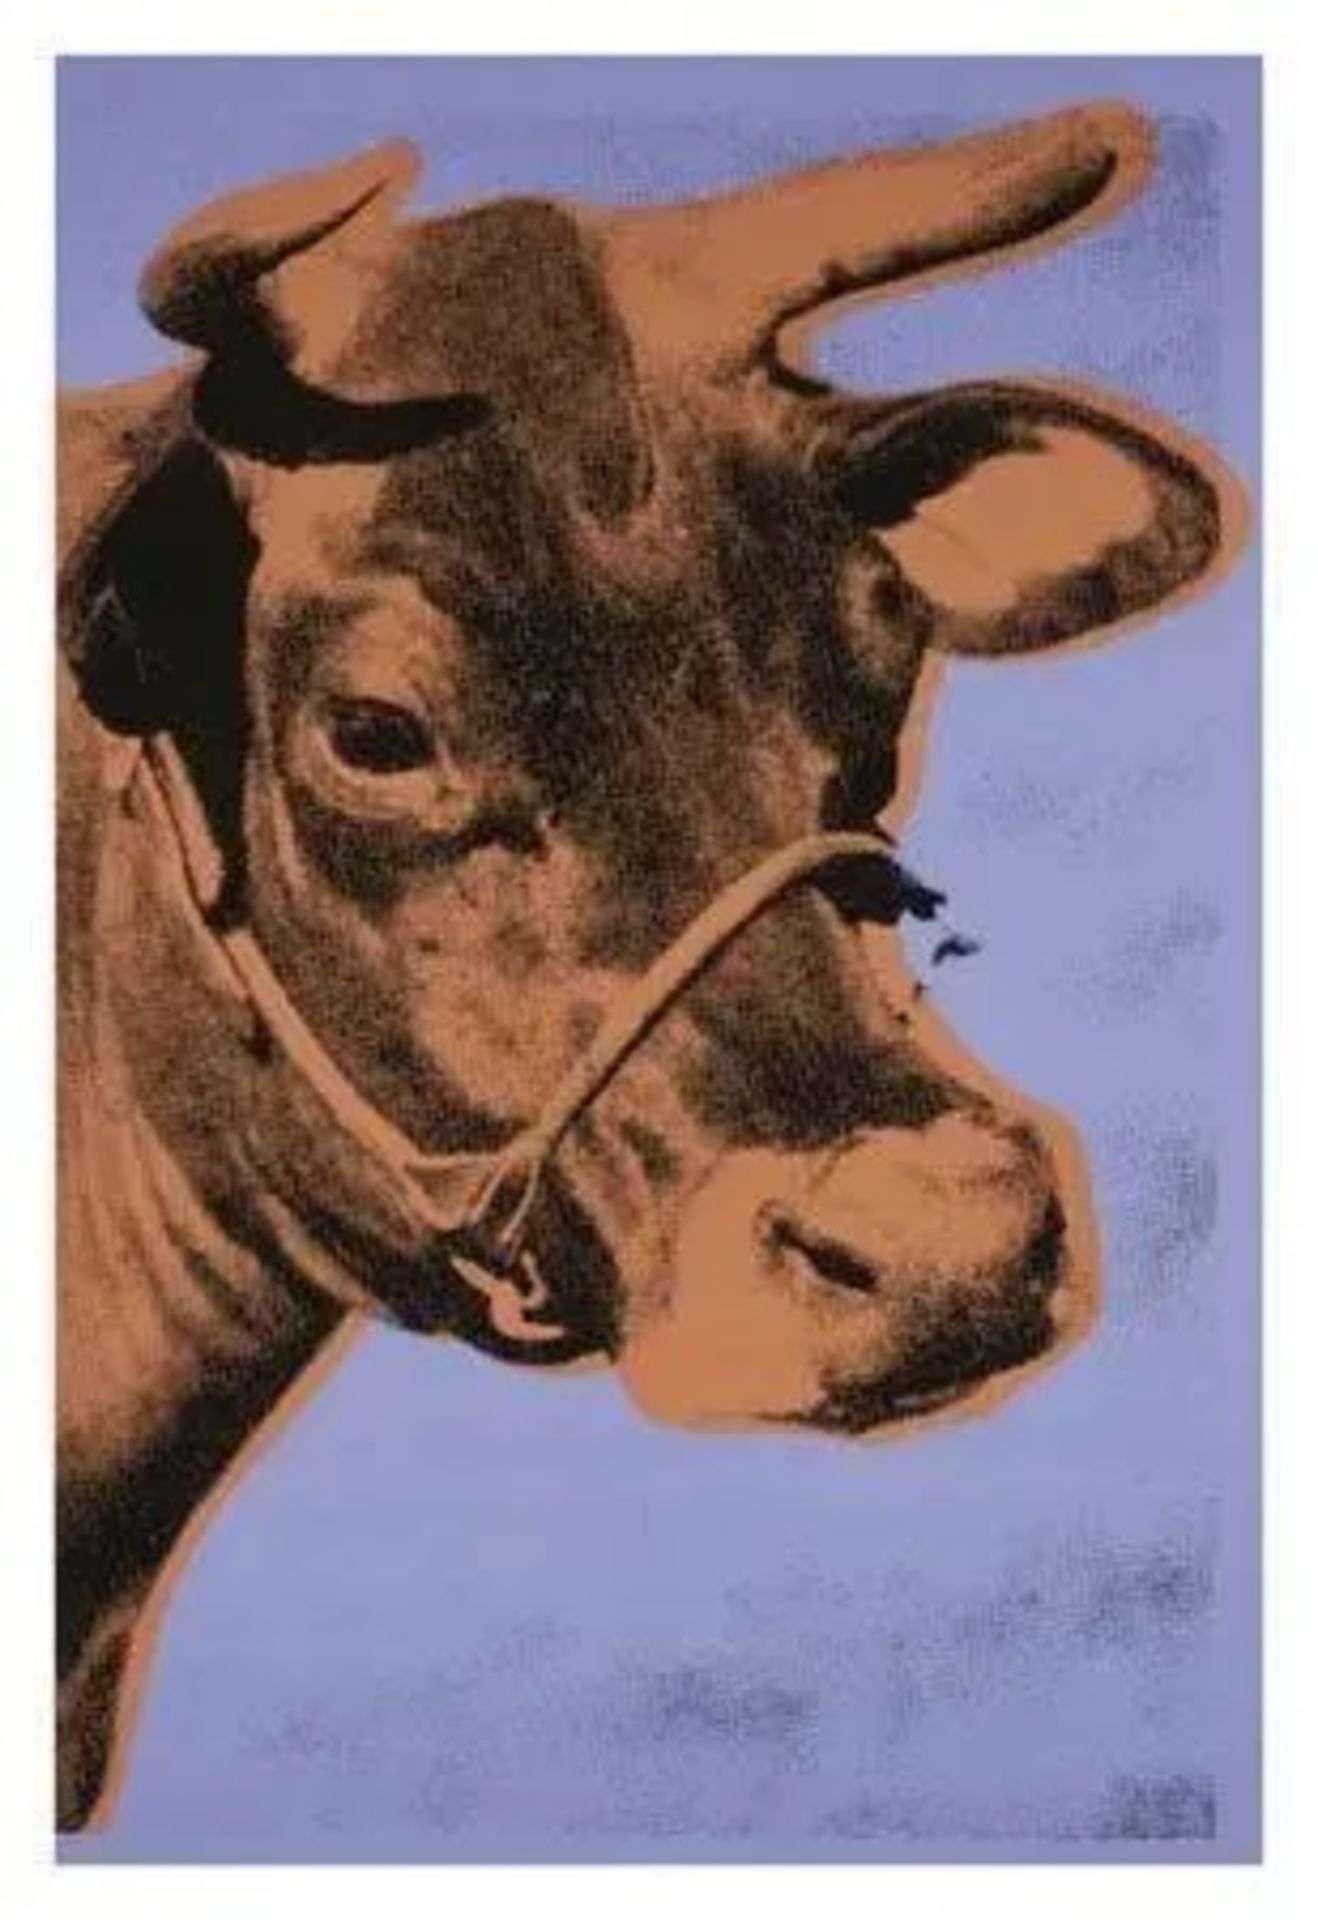 Andy Warhol "Cow, 1971" Offset Lithograph